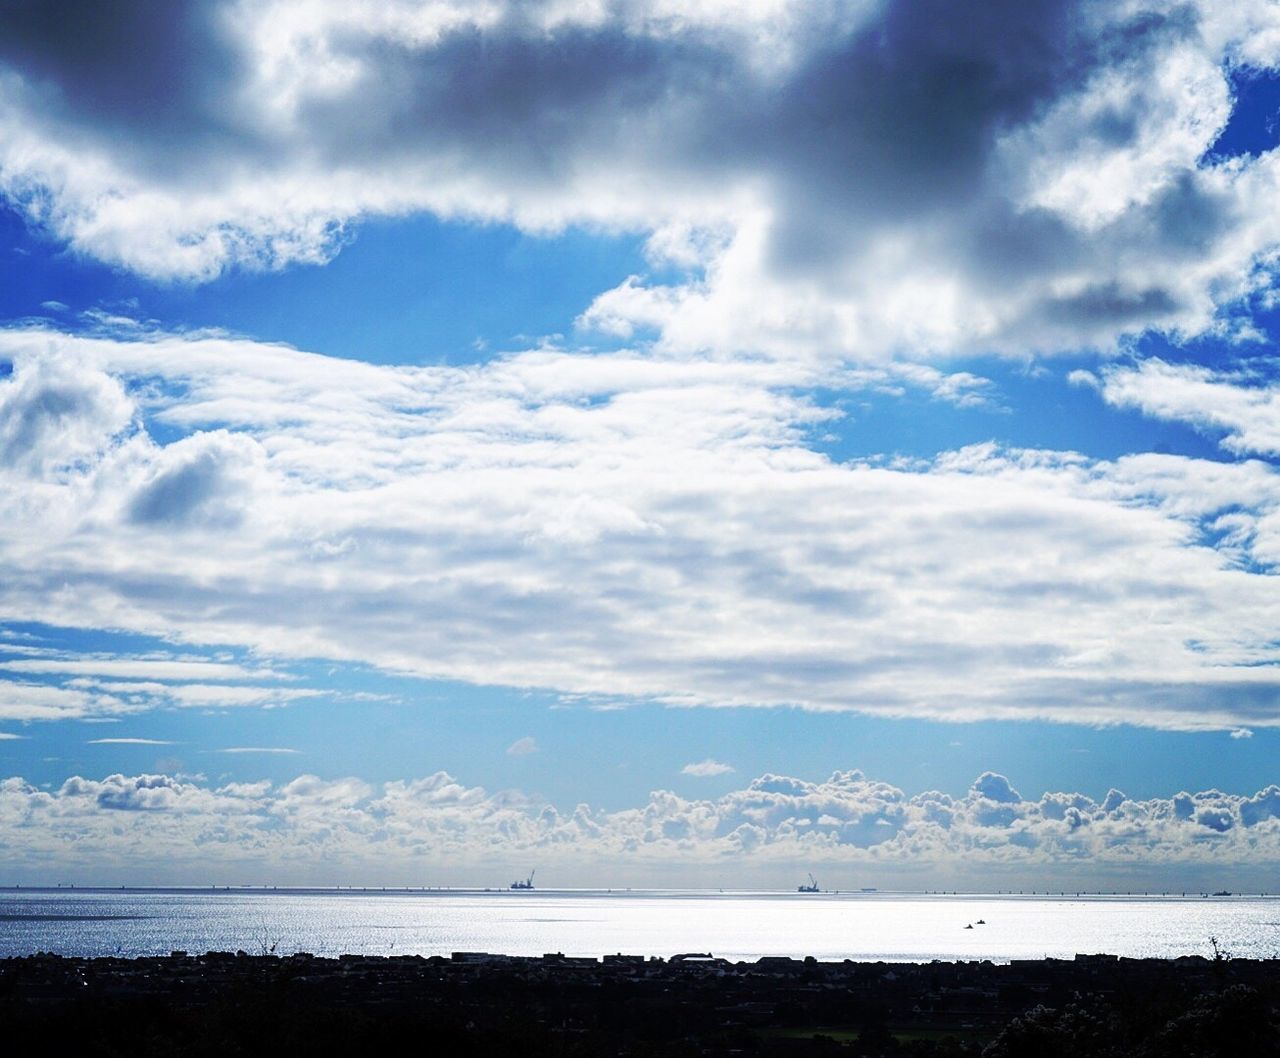 VIEW OF CALM SEA AGAINST CLOUDS